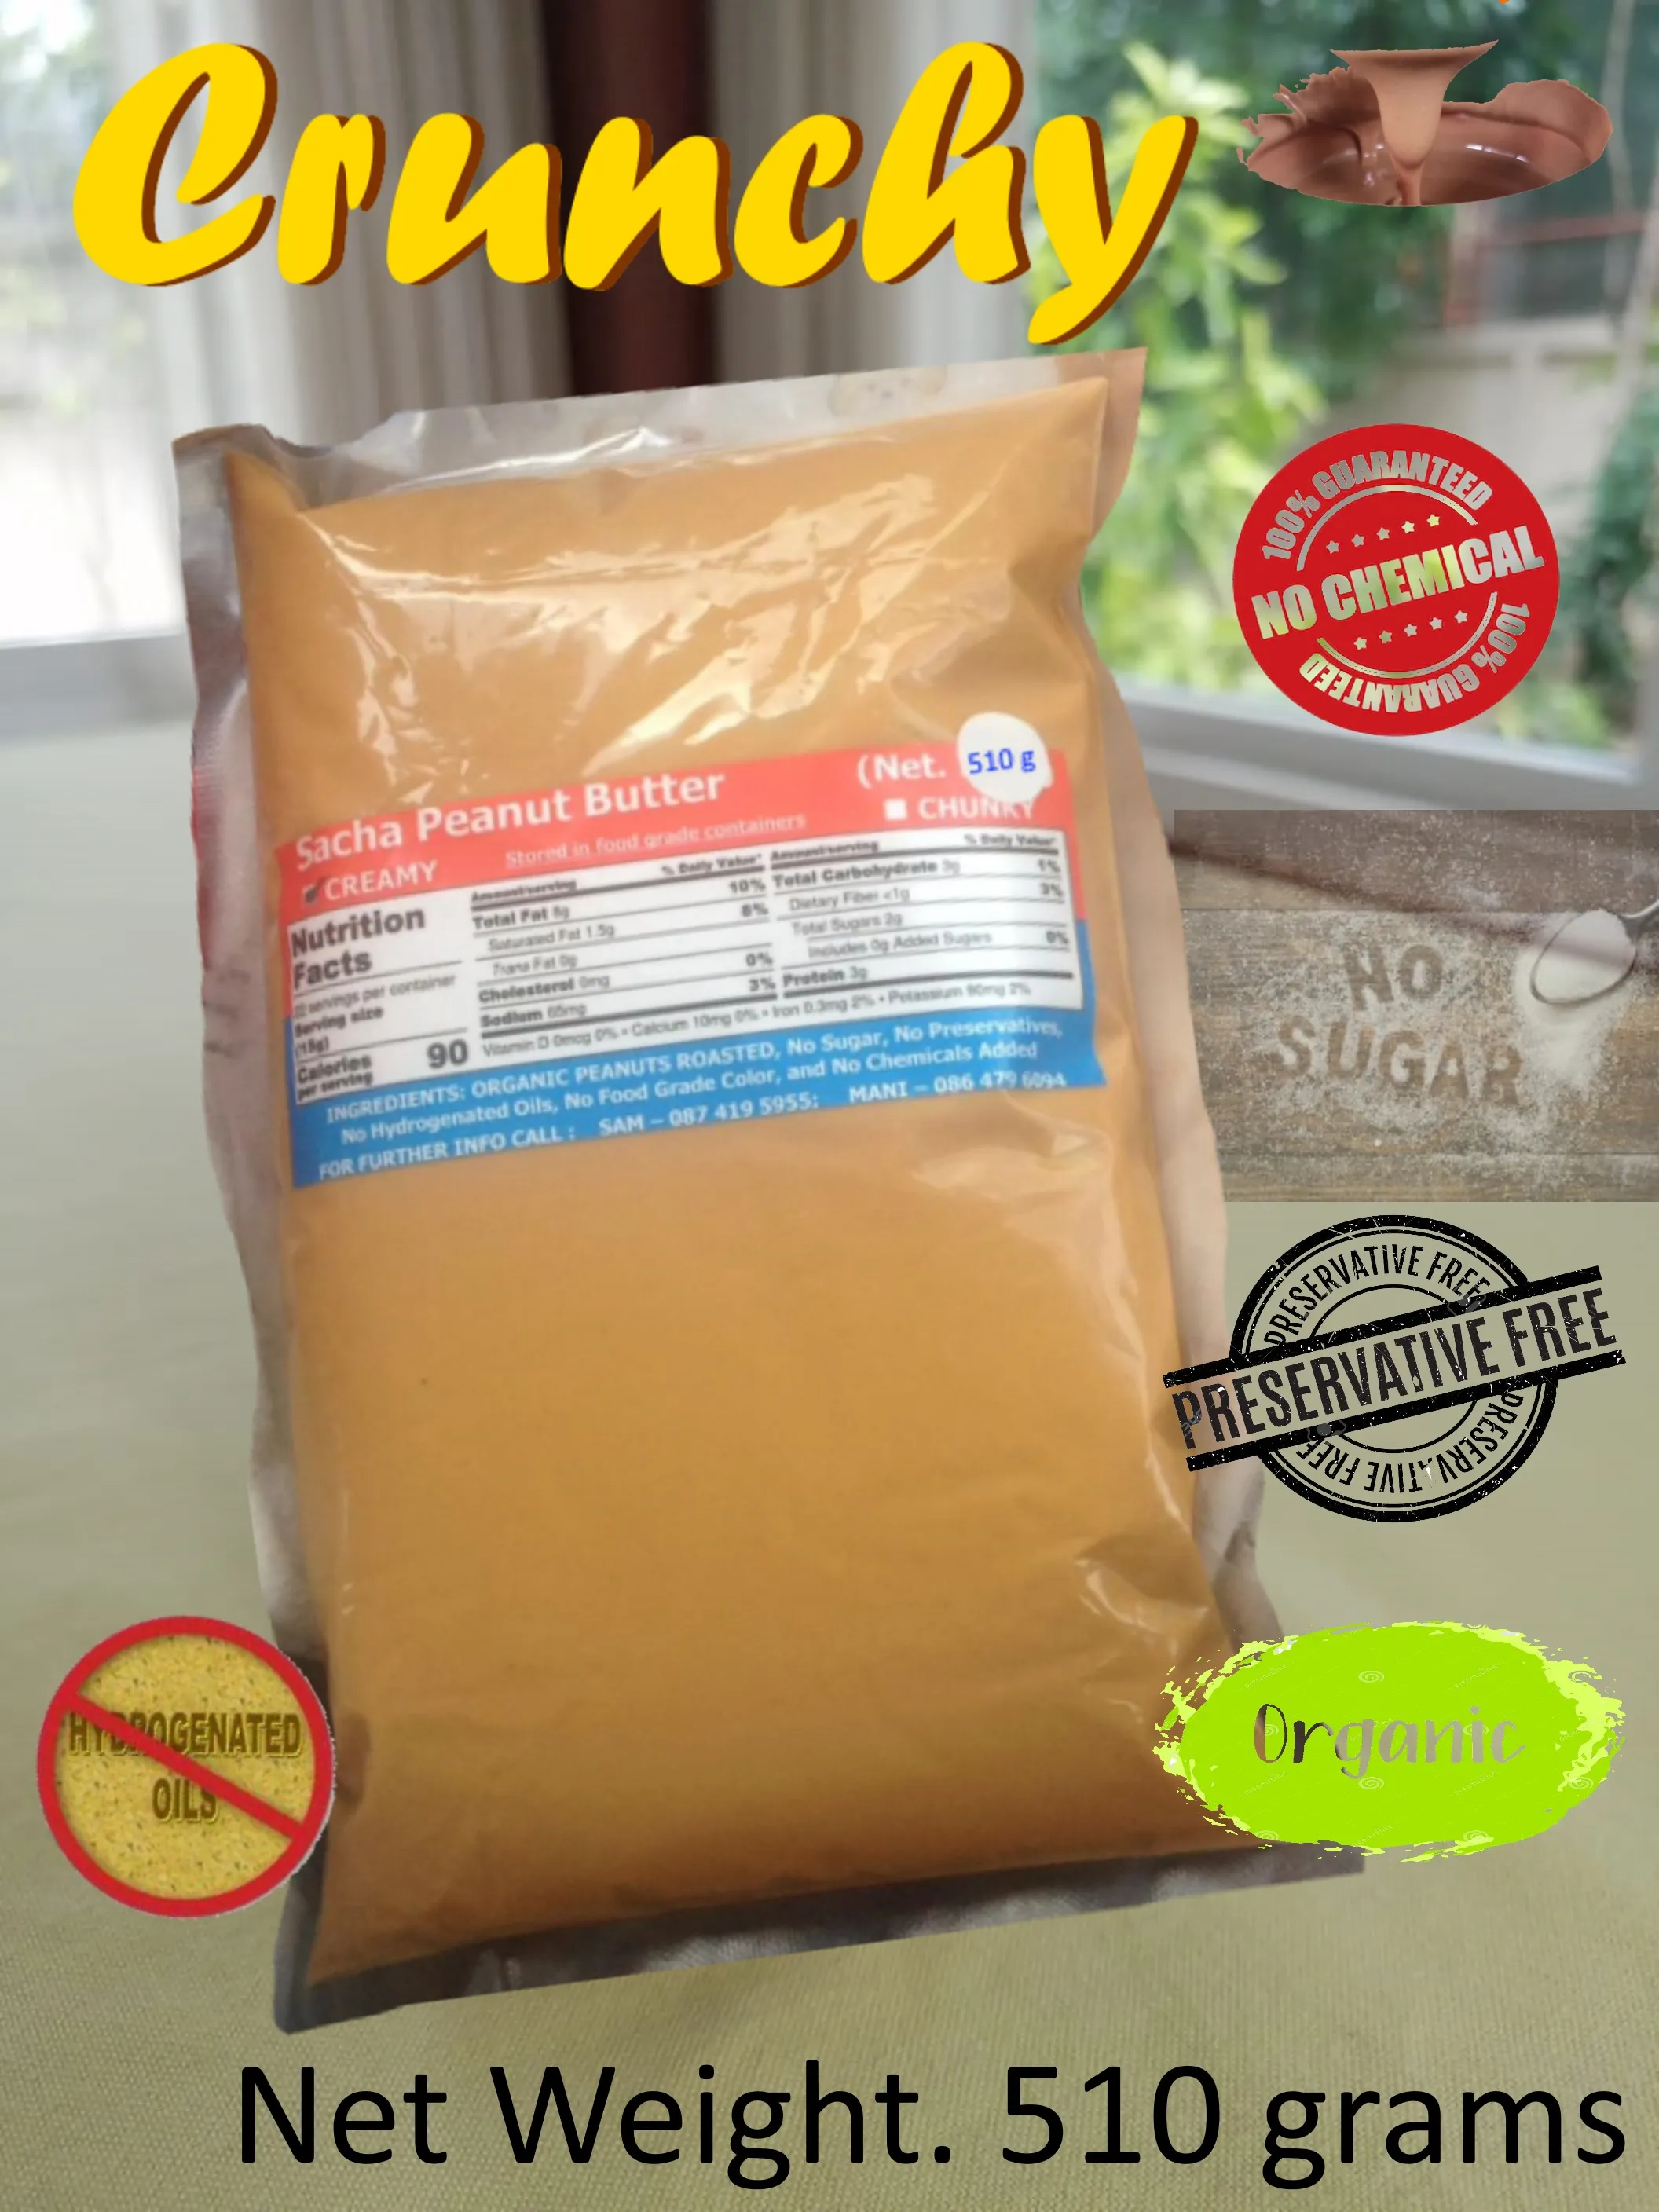 Sacha Peanut Butter (Crunchy) All Natural Organic (510 grams) - Free Delivery, ซาช่า-เนยถั่ว (ส่งฟรี)